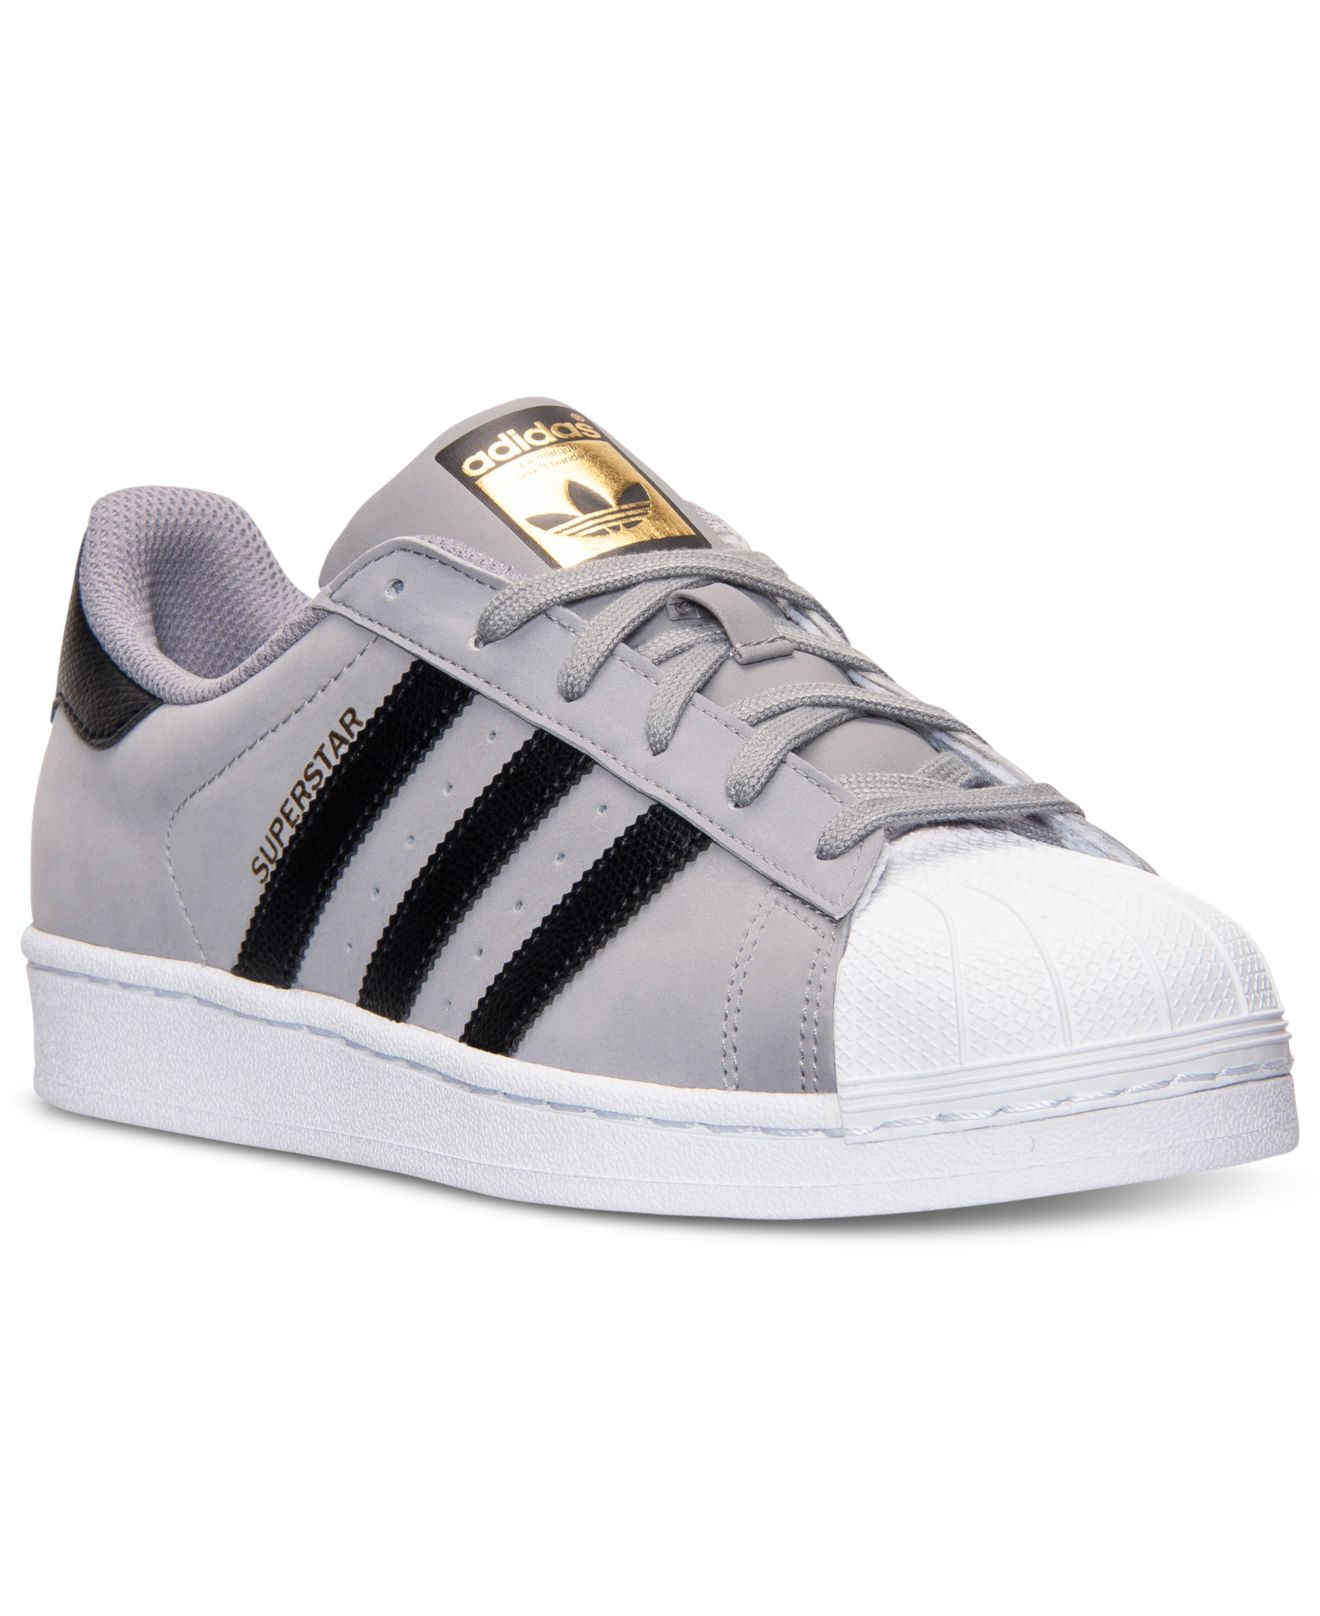 Lyst - Adidas Men'S Superstar Casual Sneakers From Finish Line in Gray ...